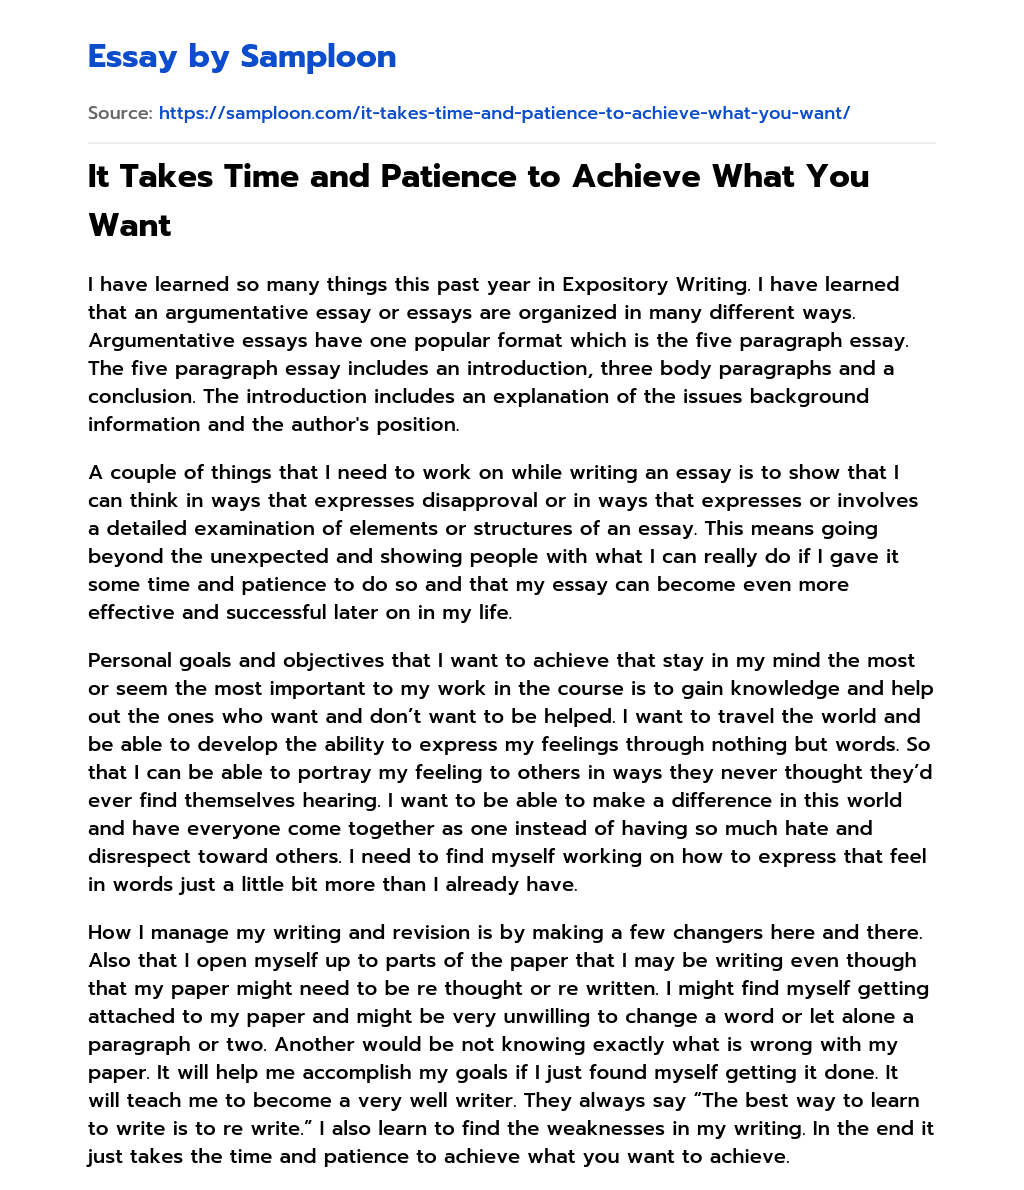 It Takes Time and Patience to Achieve What You Want essay